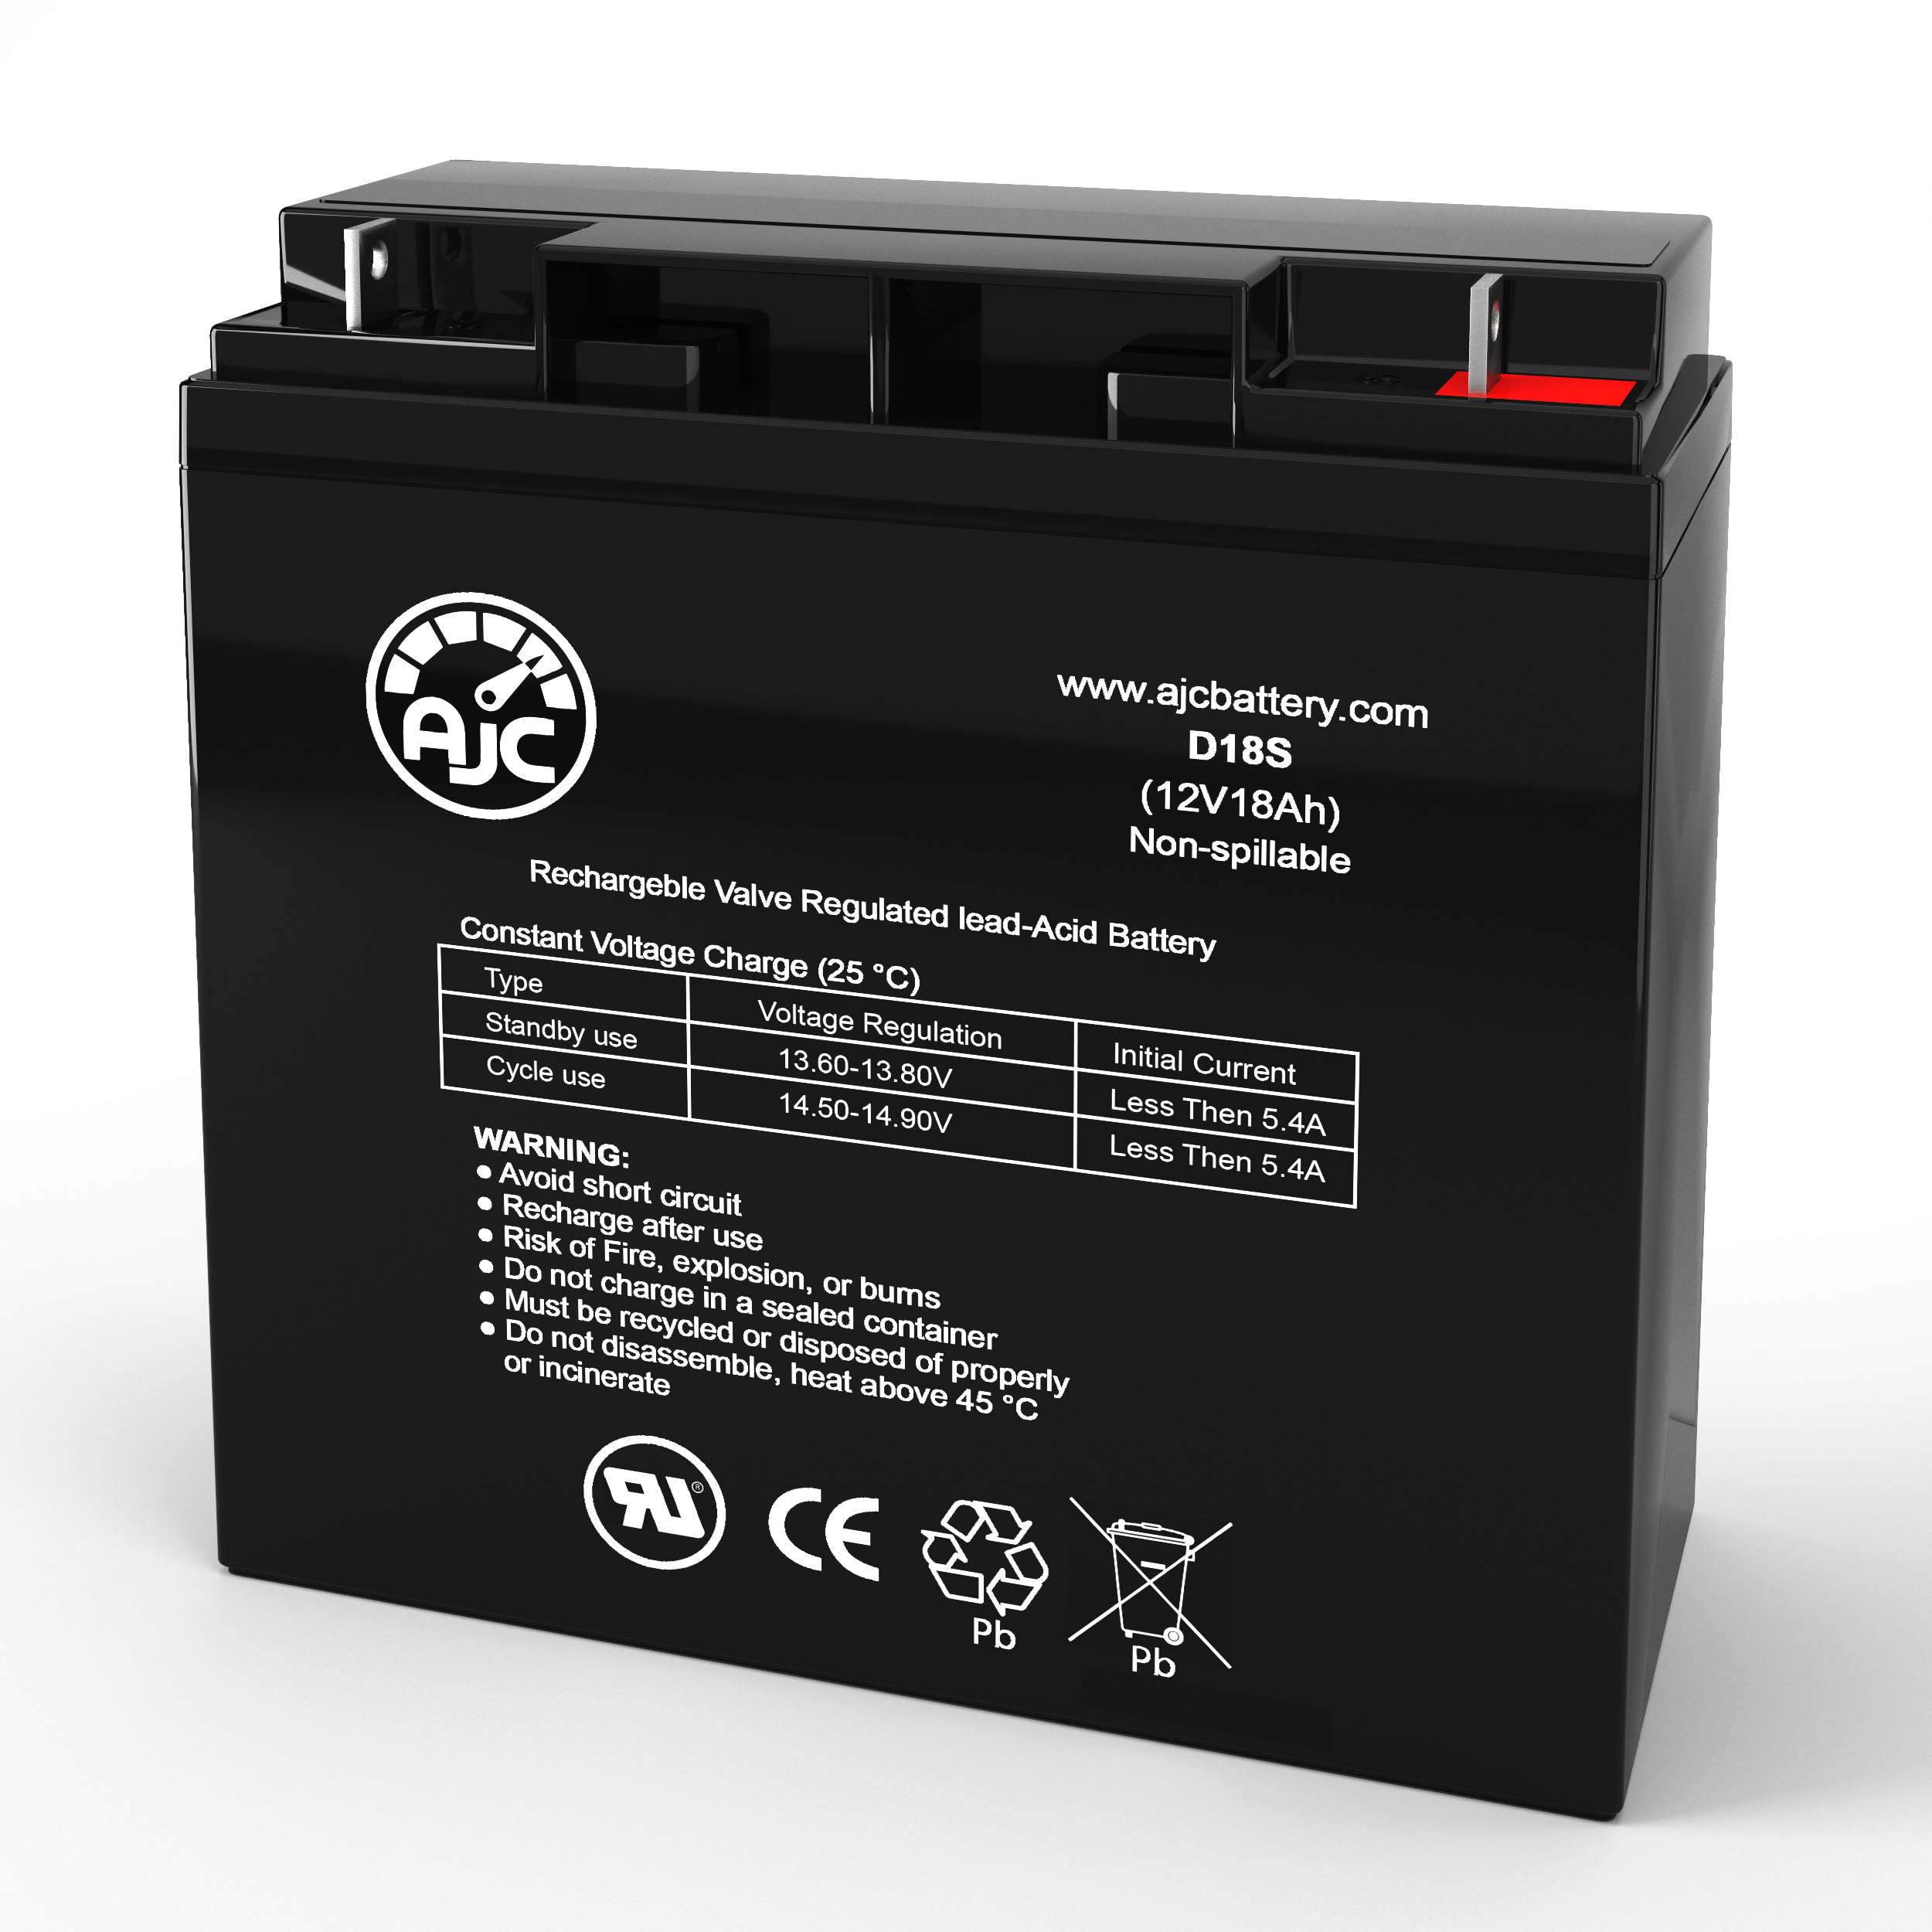 Alpha Technologies CFR 1500C 12V 18Ah UPS Battery This is an AJC Brand Replacement